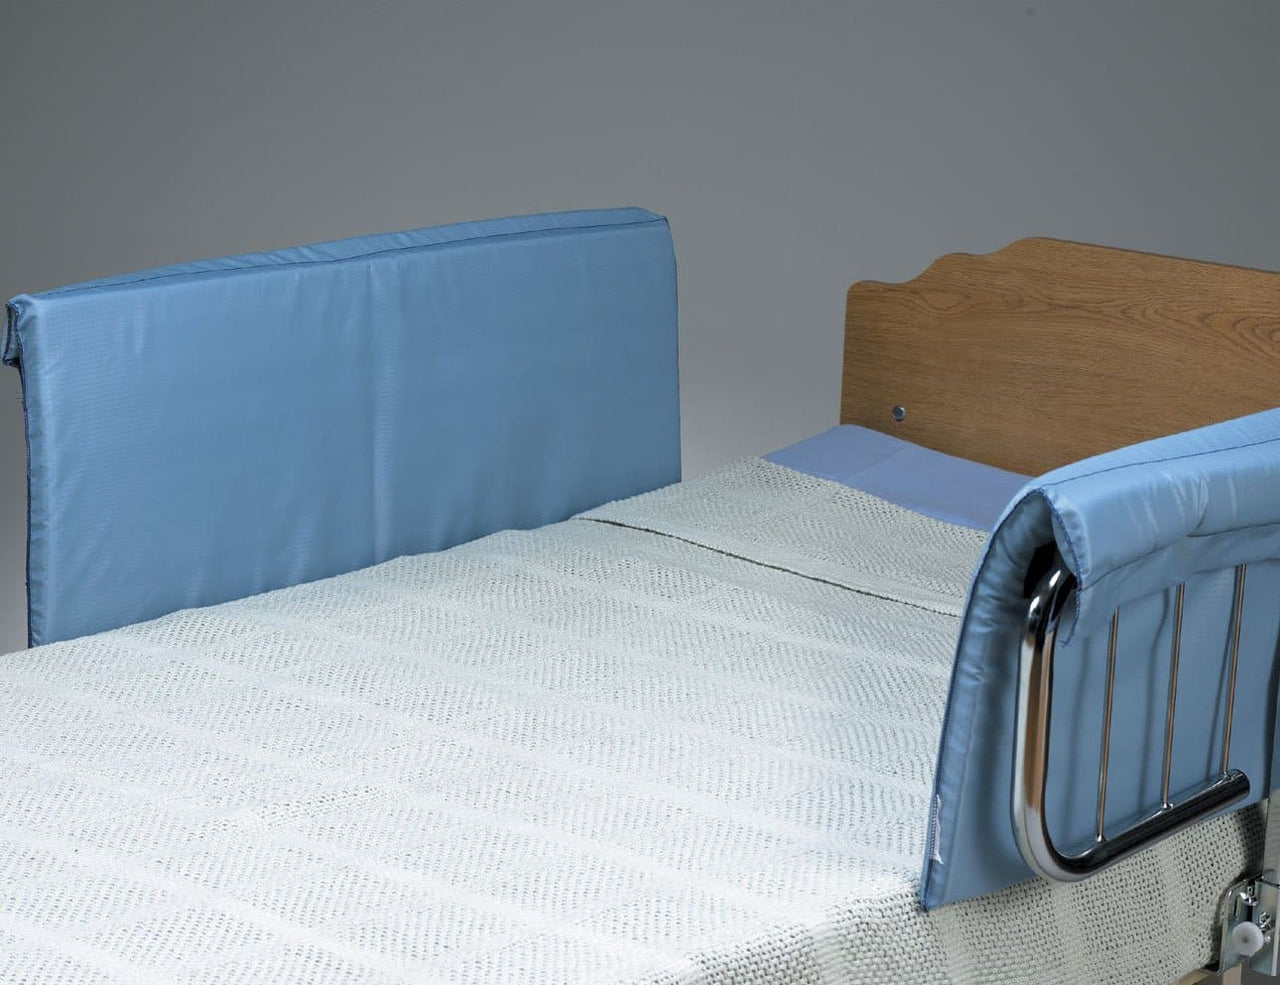 DMI Convoluted Hospital-Size Bed Pad (33 x 72 x 4-Inches, Blue)